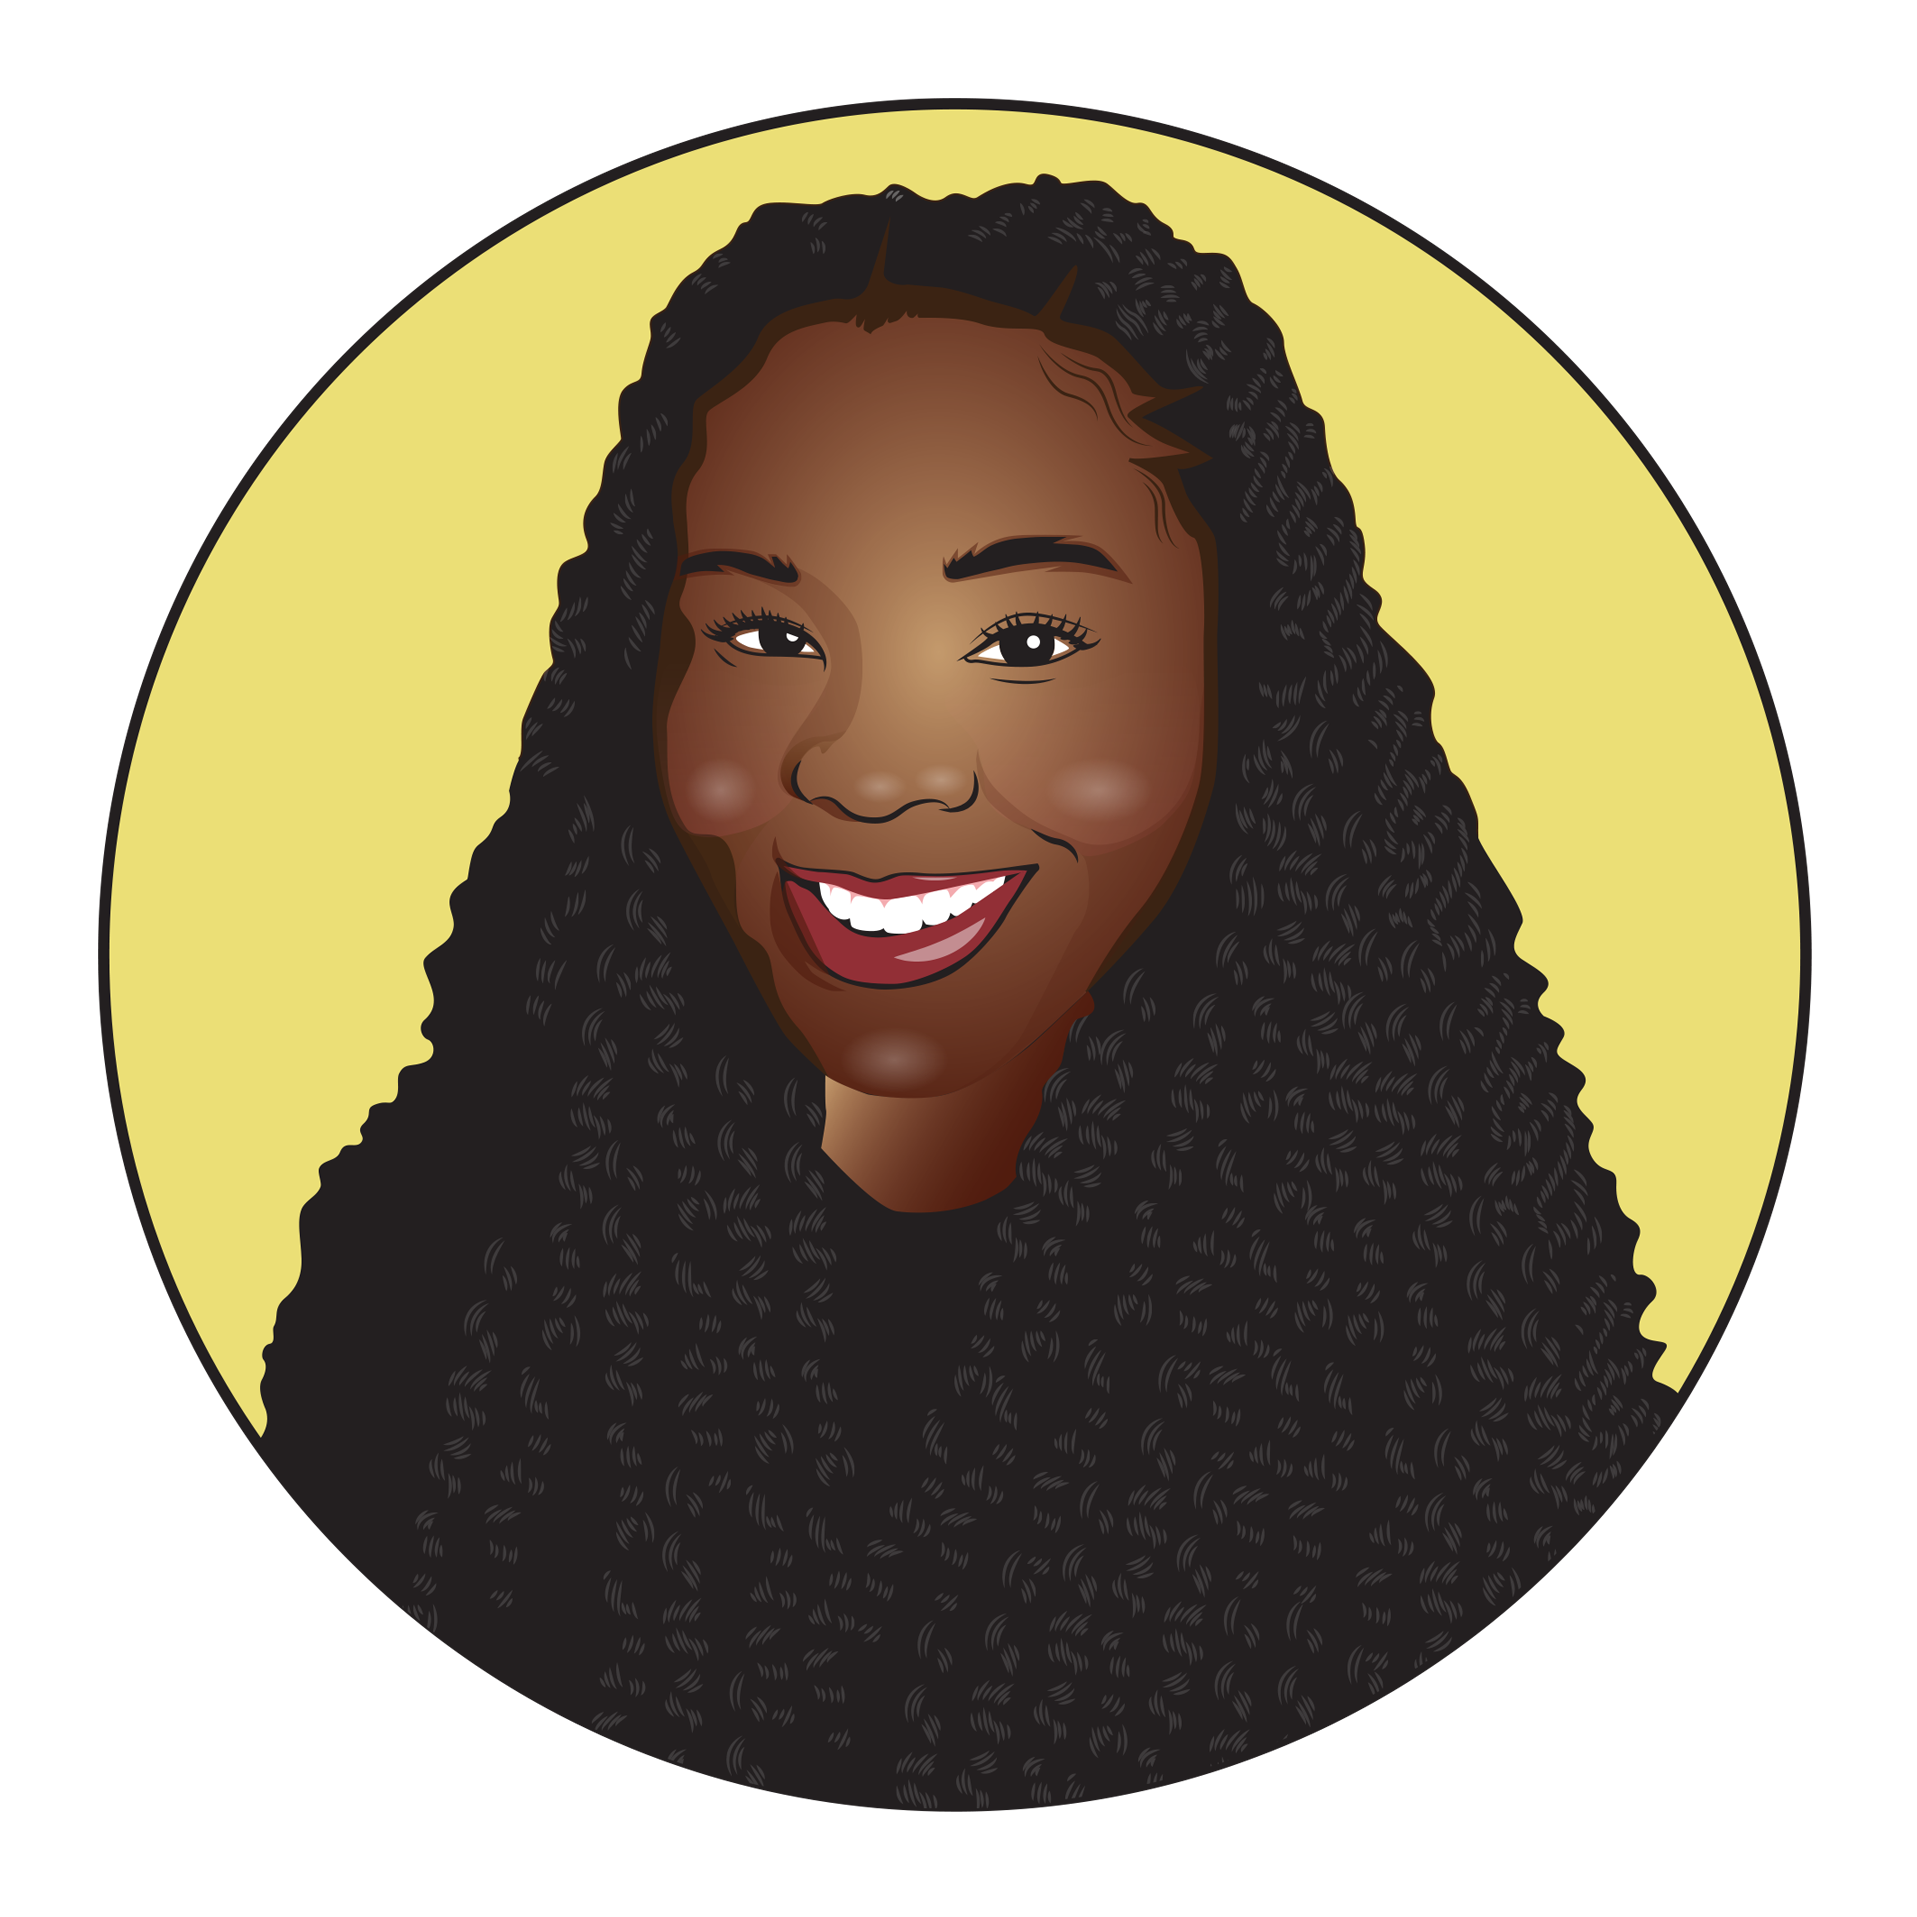 Illustrated image of LaKia, a Black woman with braids wearing a black t-shirt. Her image is set on a yellow background.